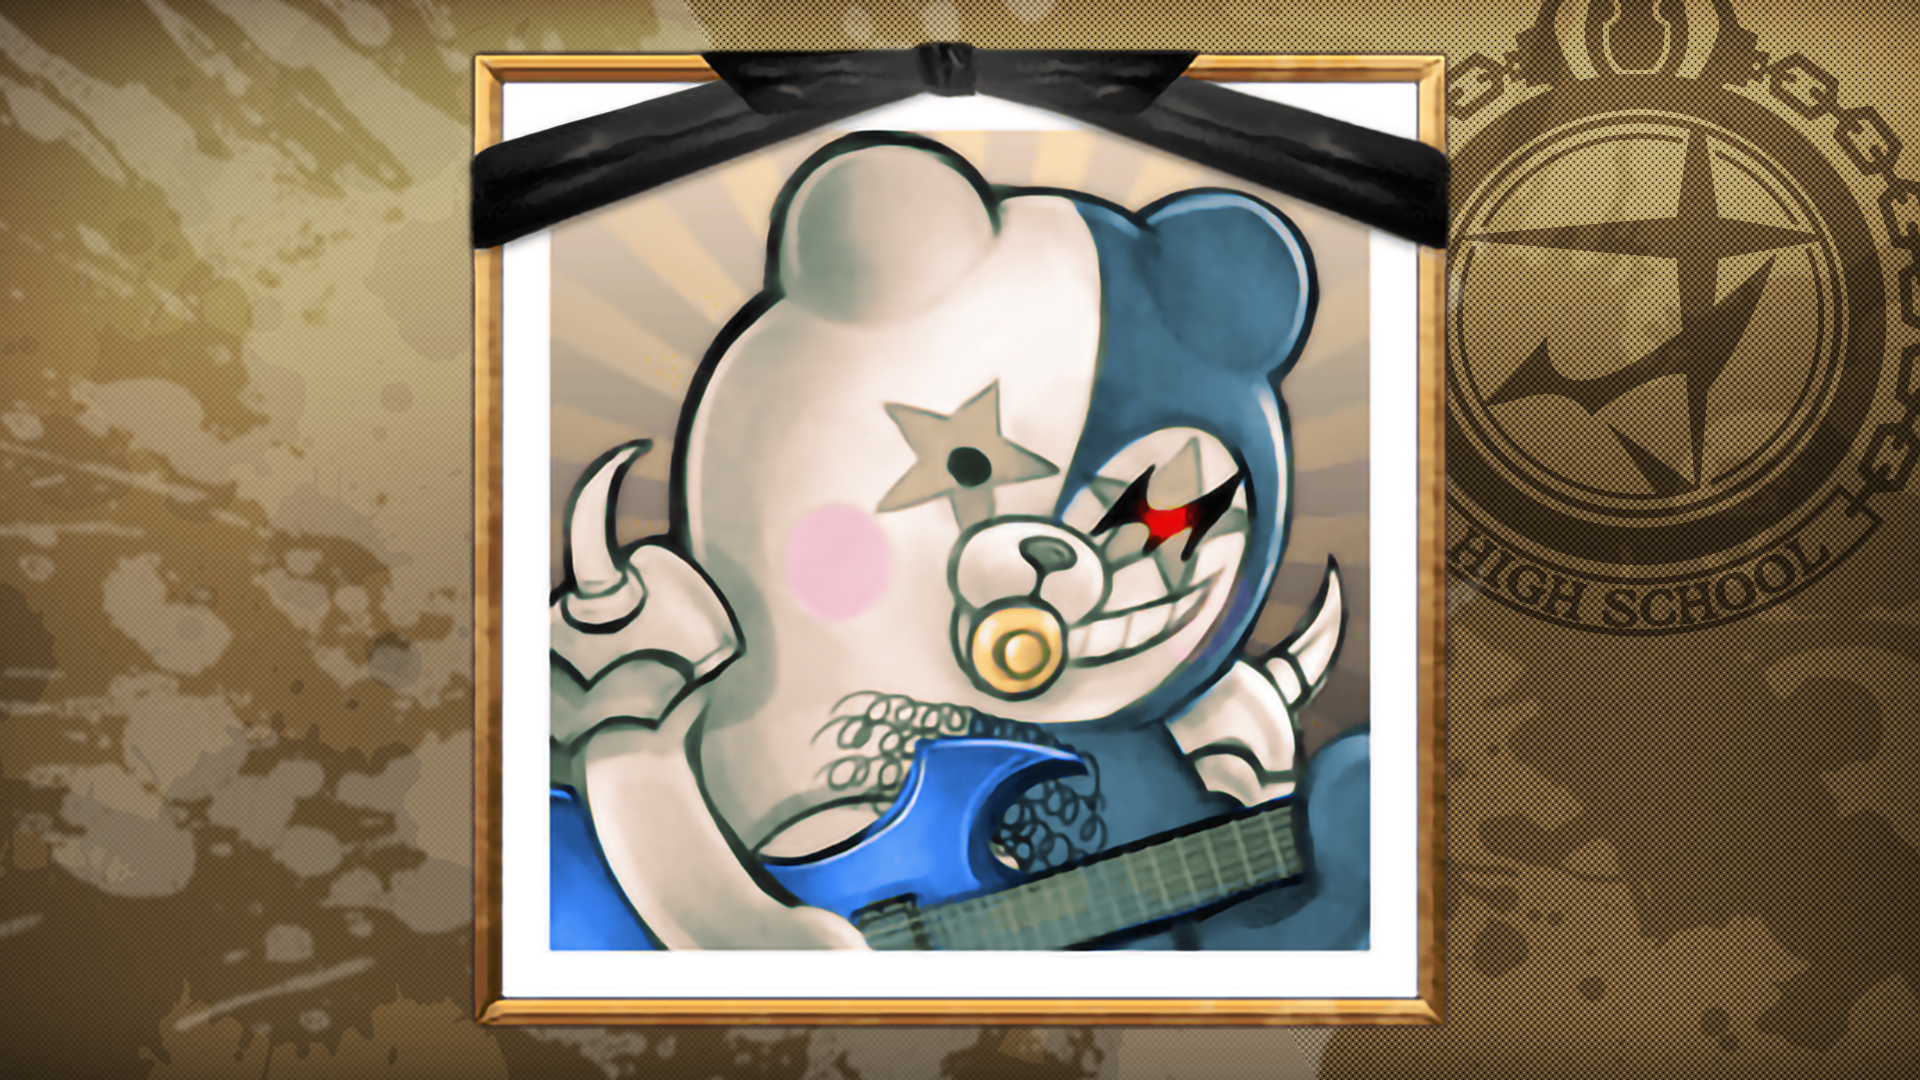 Icon for A Very Special Class Trial